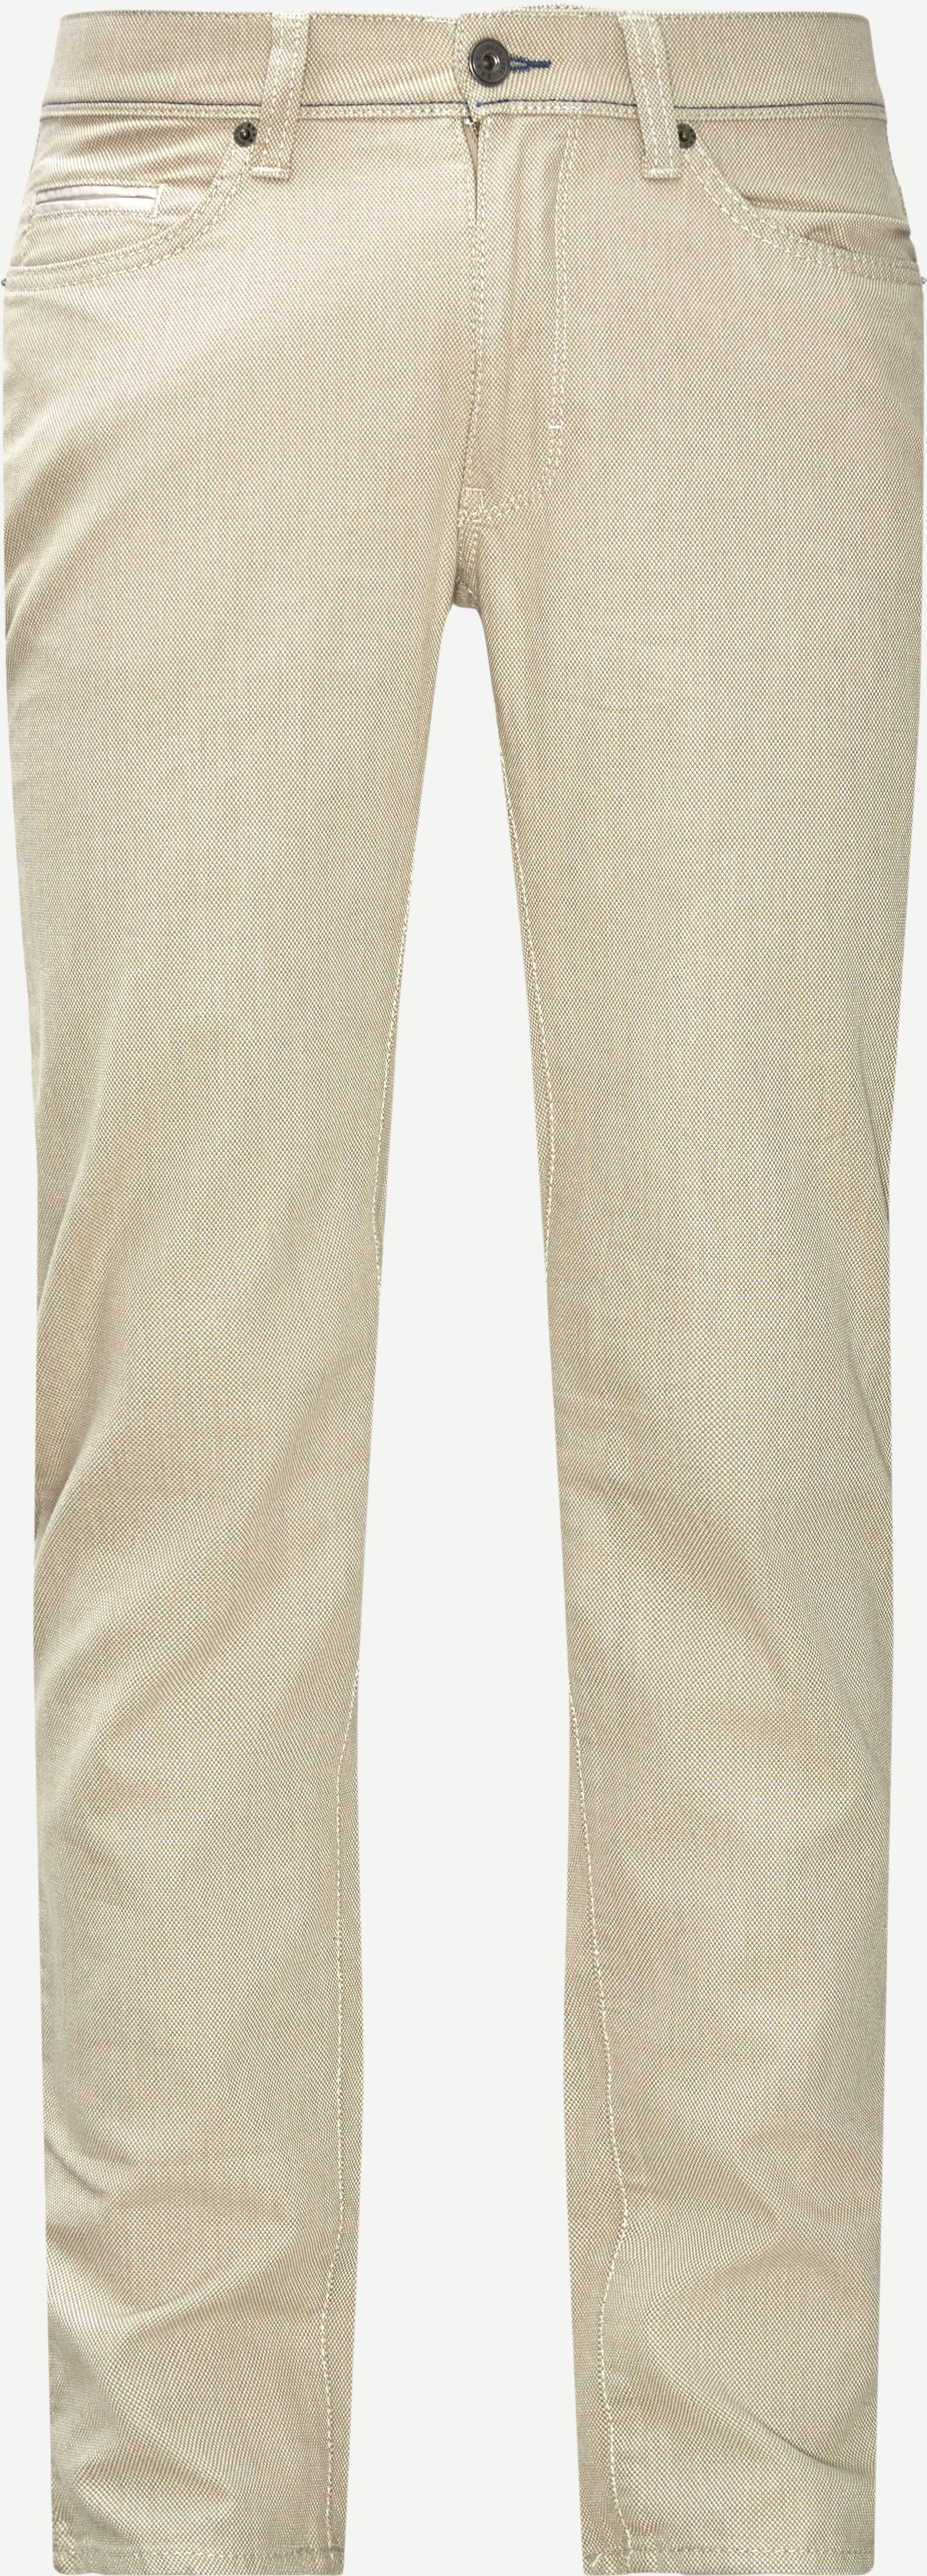 Jeans - Straight fit - Sand